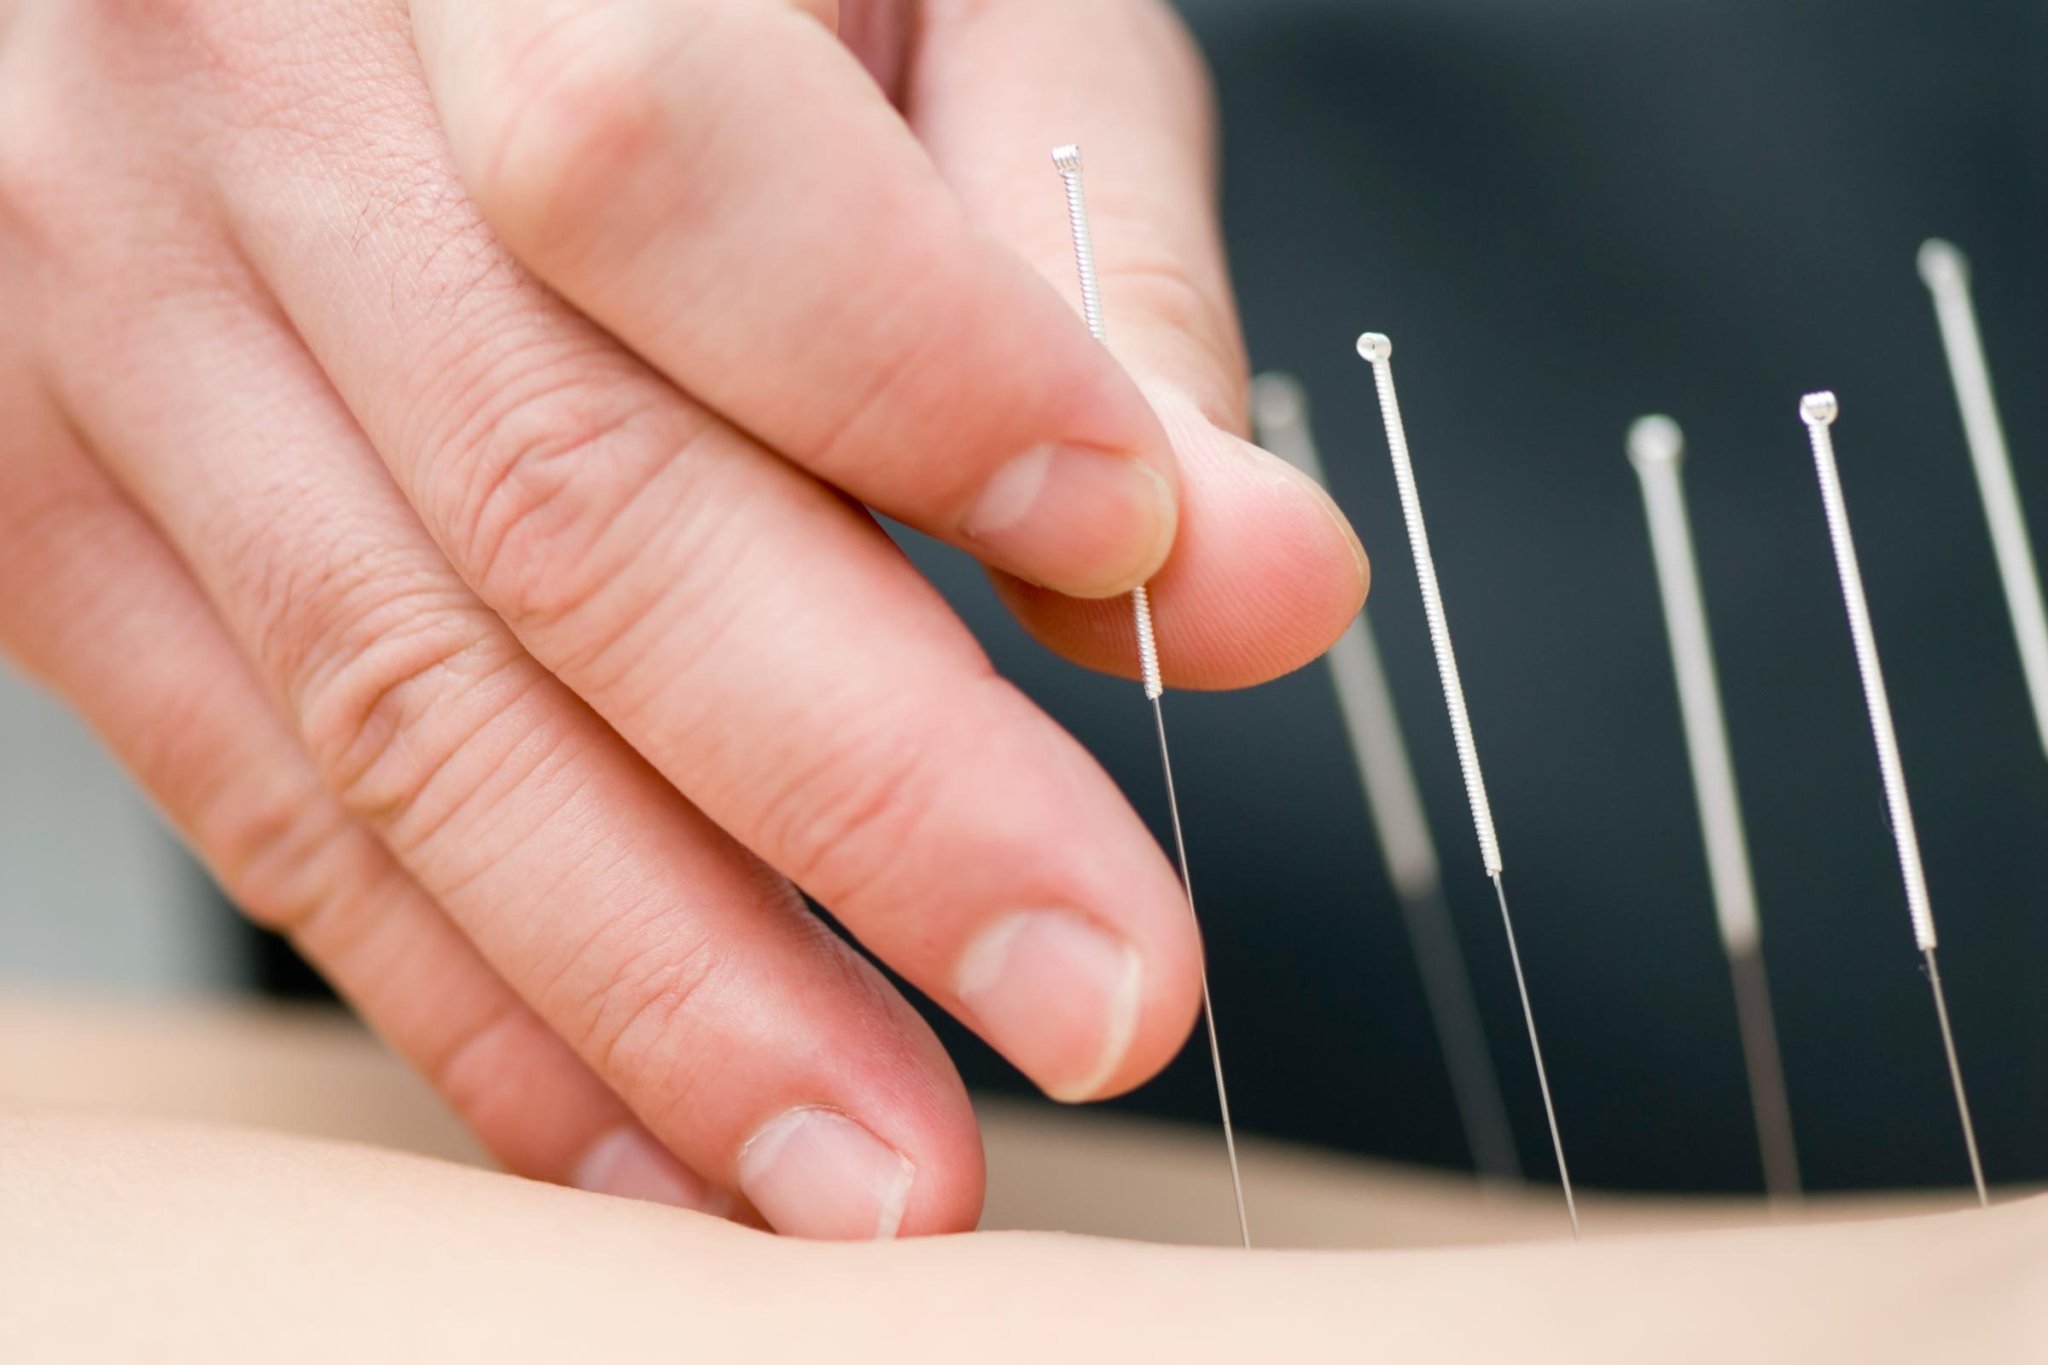 Acupuncture to This Surprising Body Part May Help You Lose Weight, Says New Study